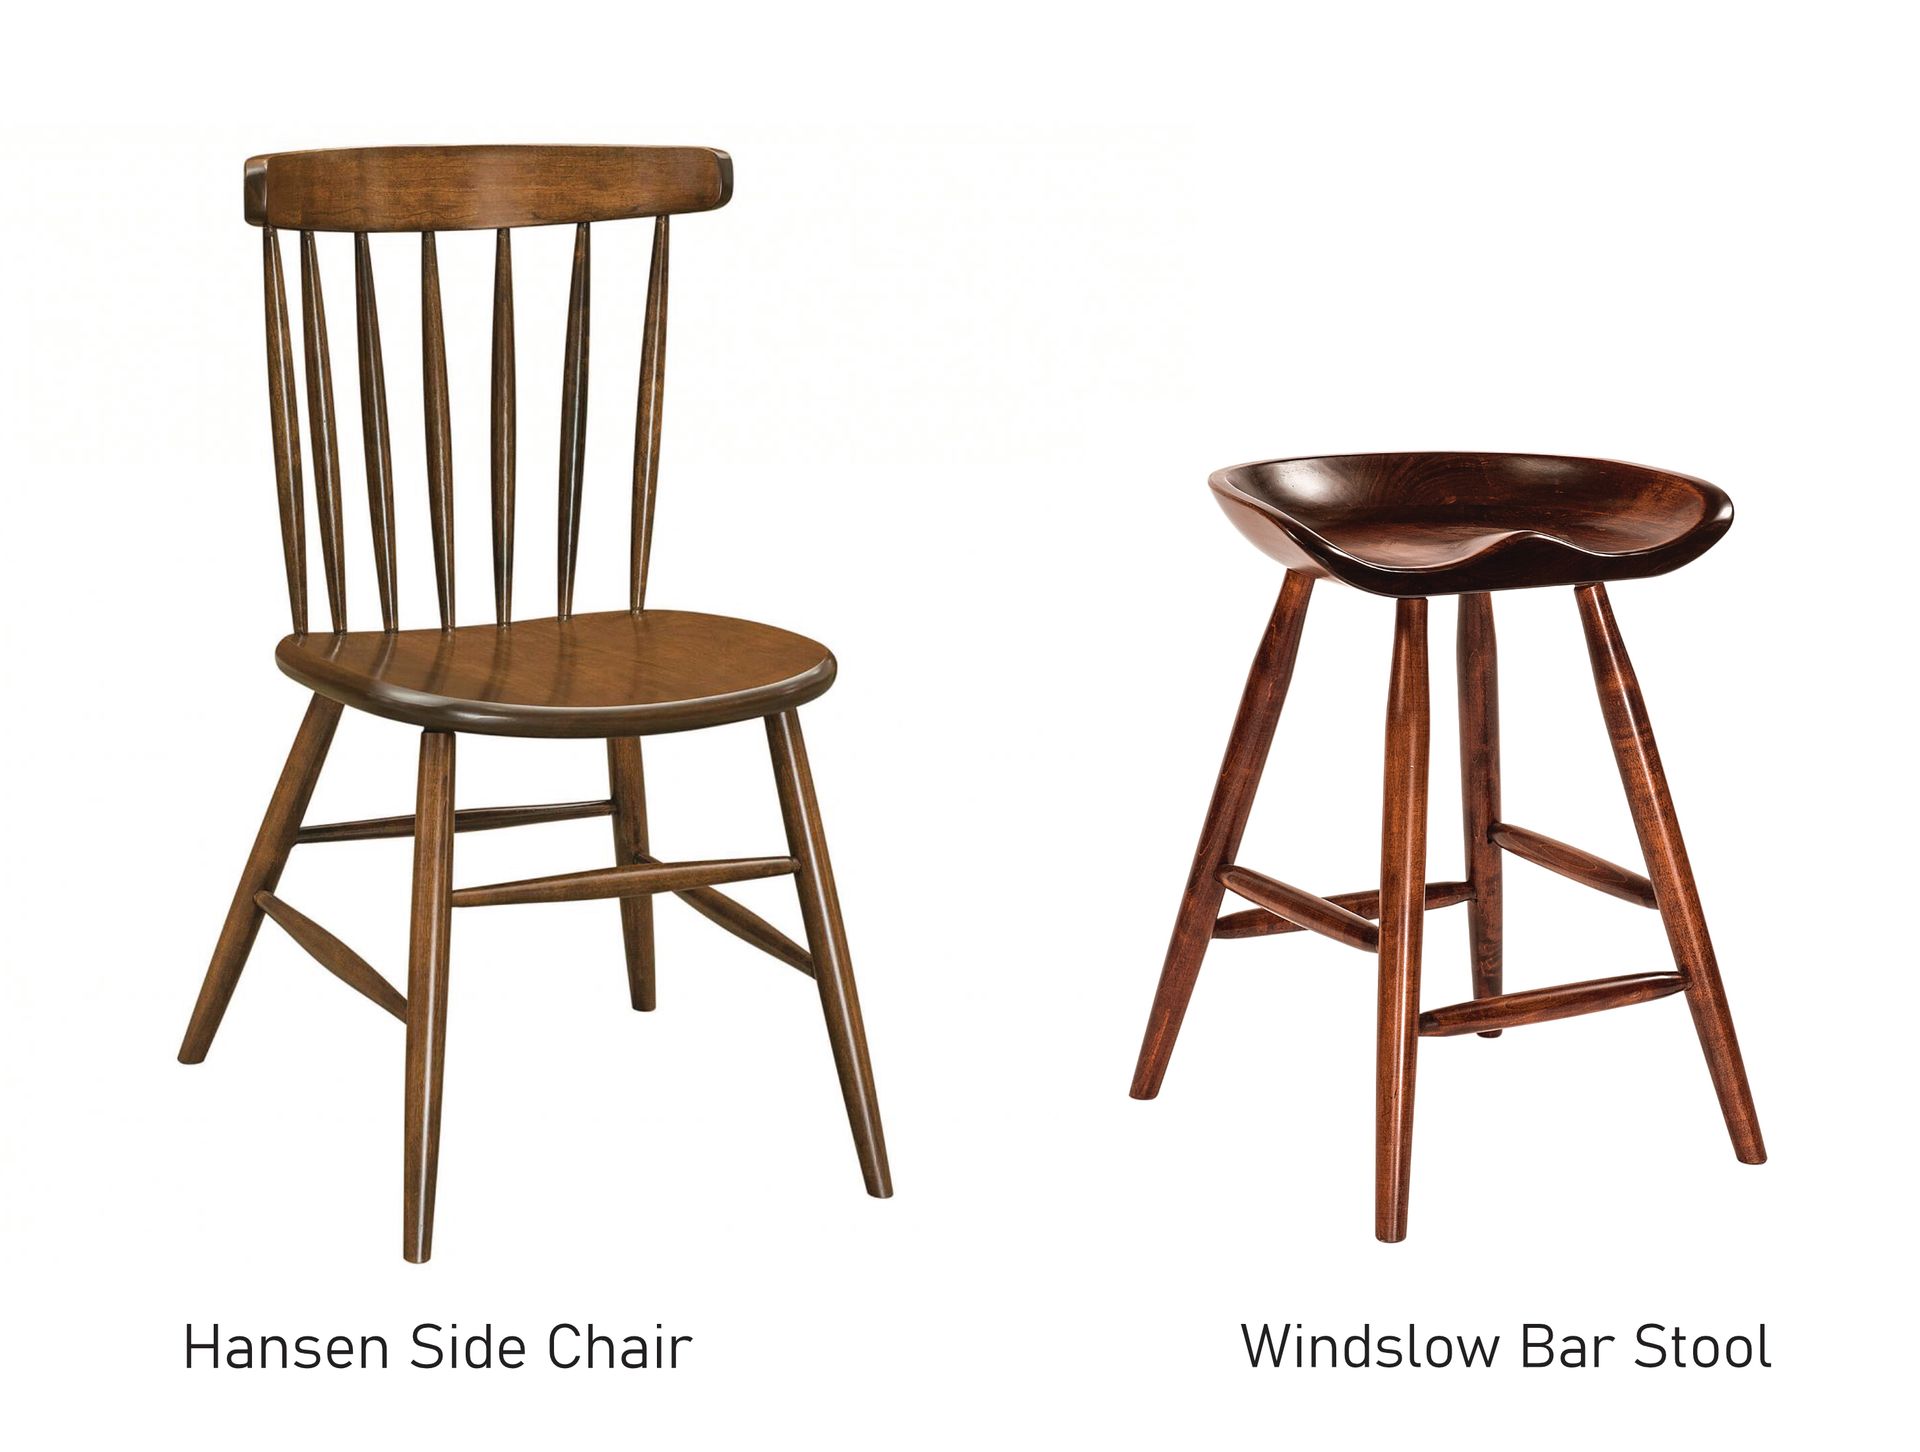 Pairing Dining Chairs And Bar Stools, Should My Bar Stools Match Dining Chairs